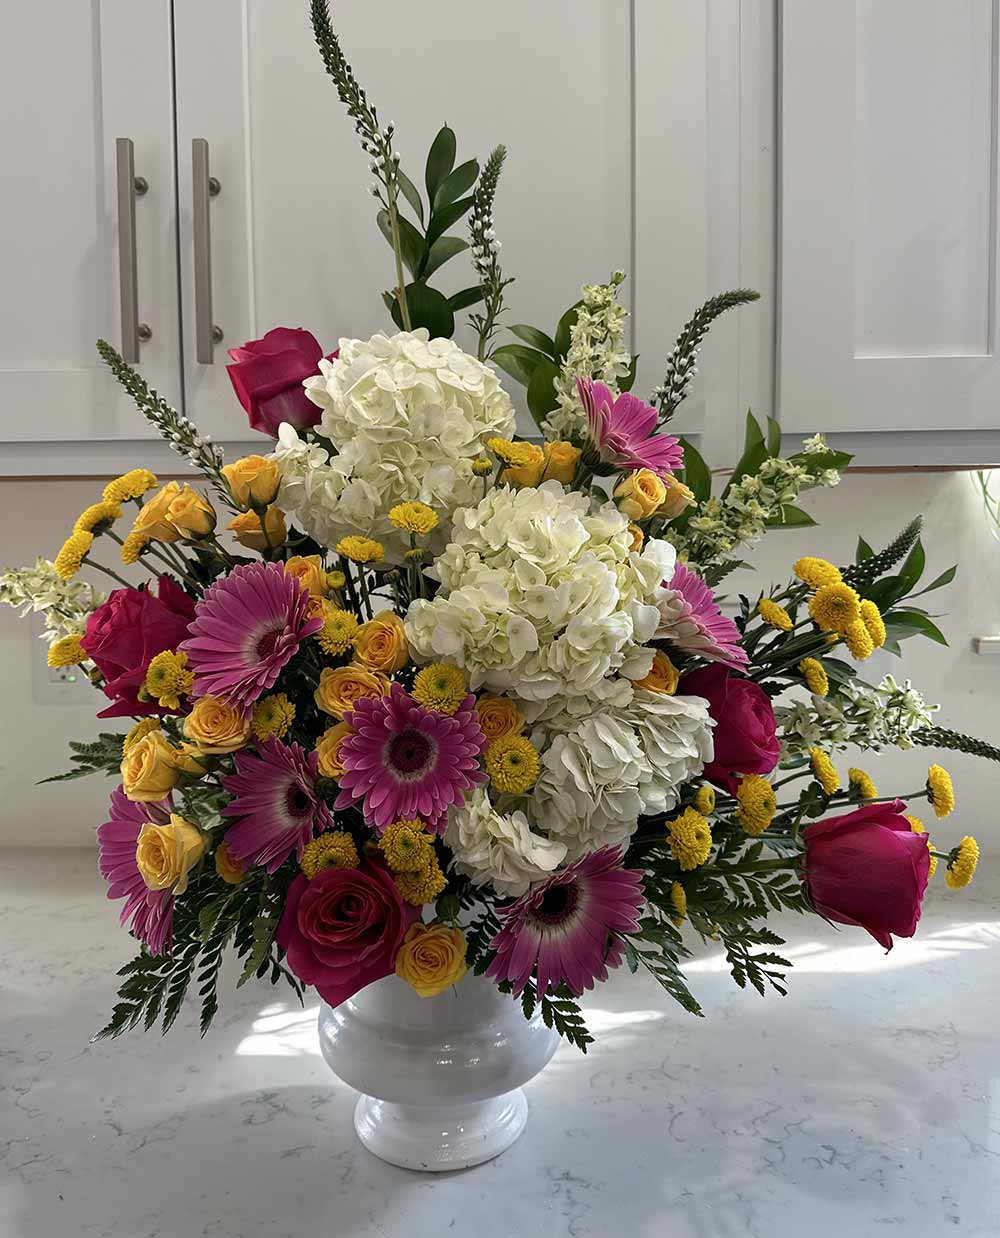 Funeral flower arrangement in vase by Blooms and Wishes, a florist located in Columbia, MO